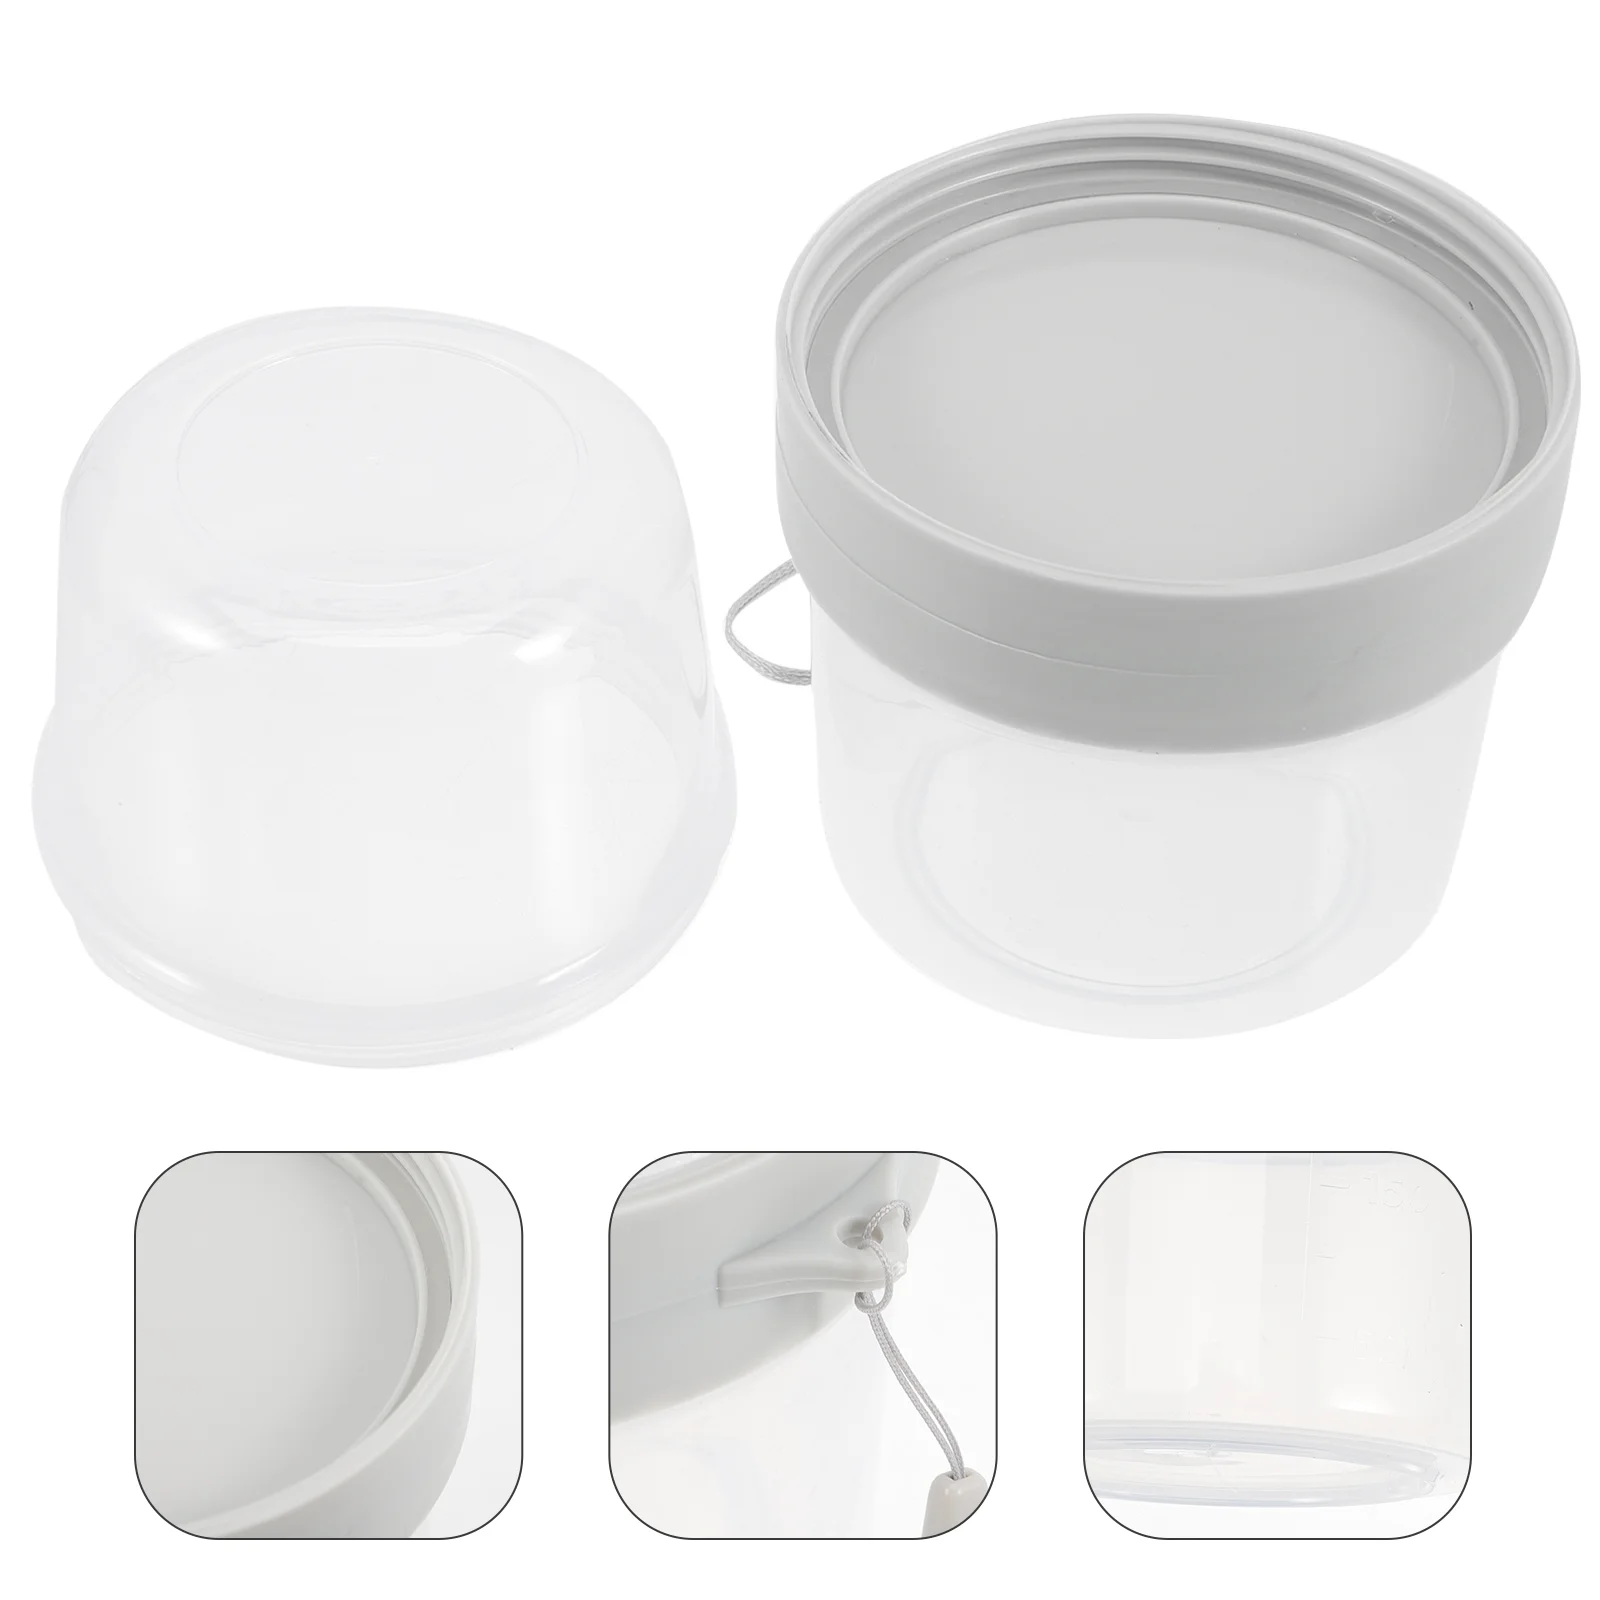 

Cups Containers Go Cup Breakfast Yogurt Container Portable Oatmeal Parfait Snack Lids Jars Cereal Dessert The Overnight Bowls